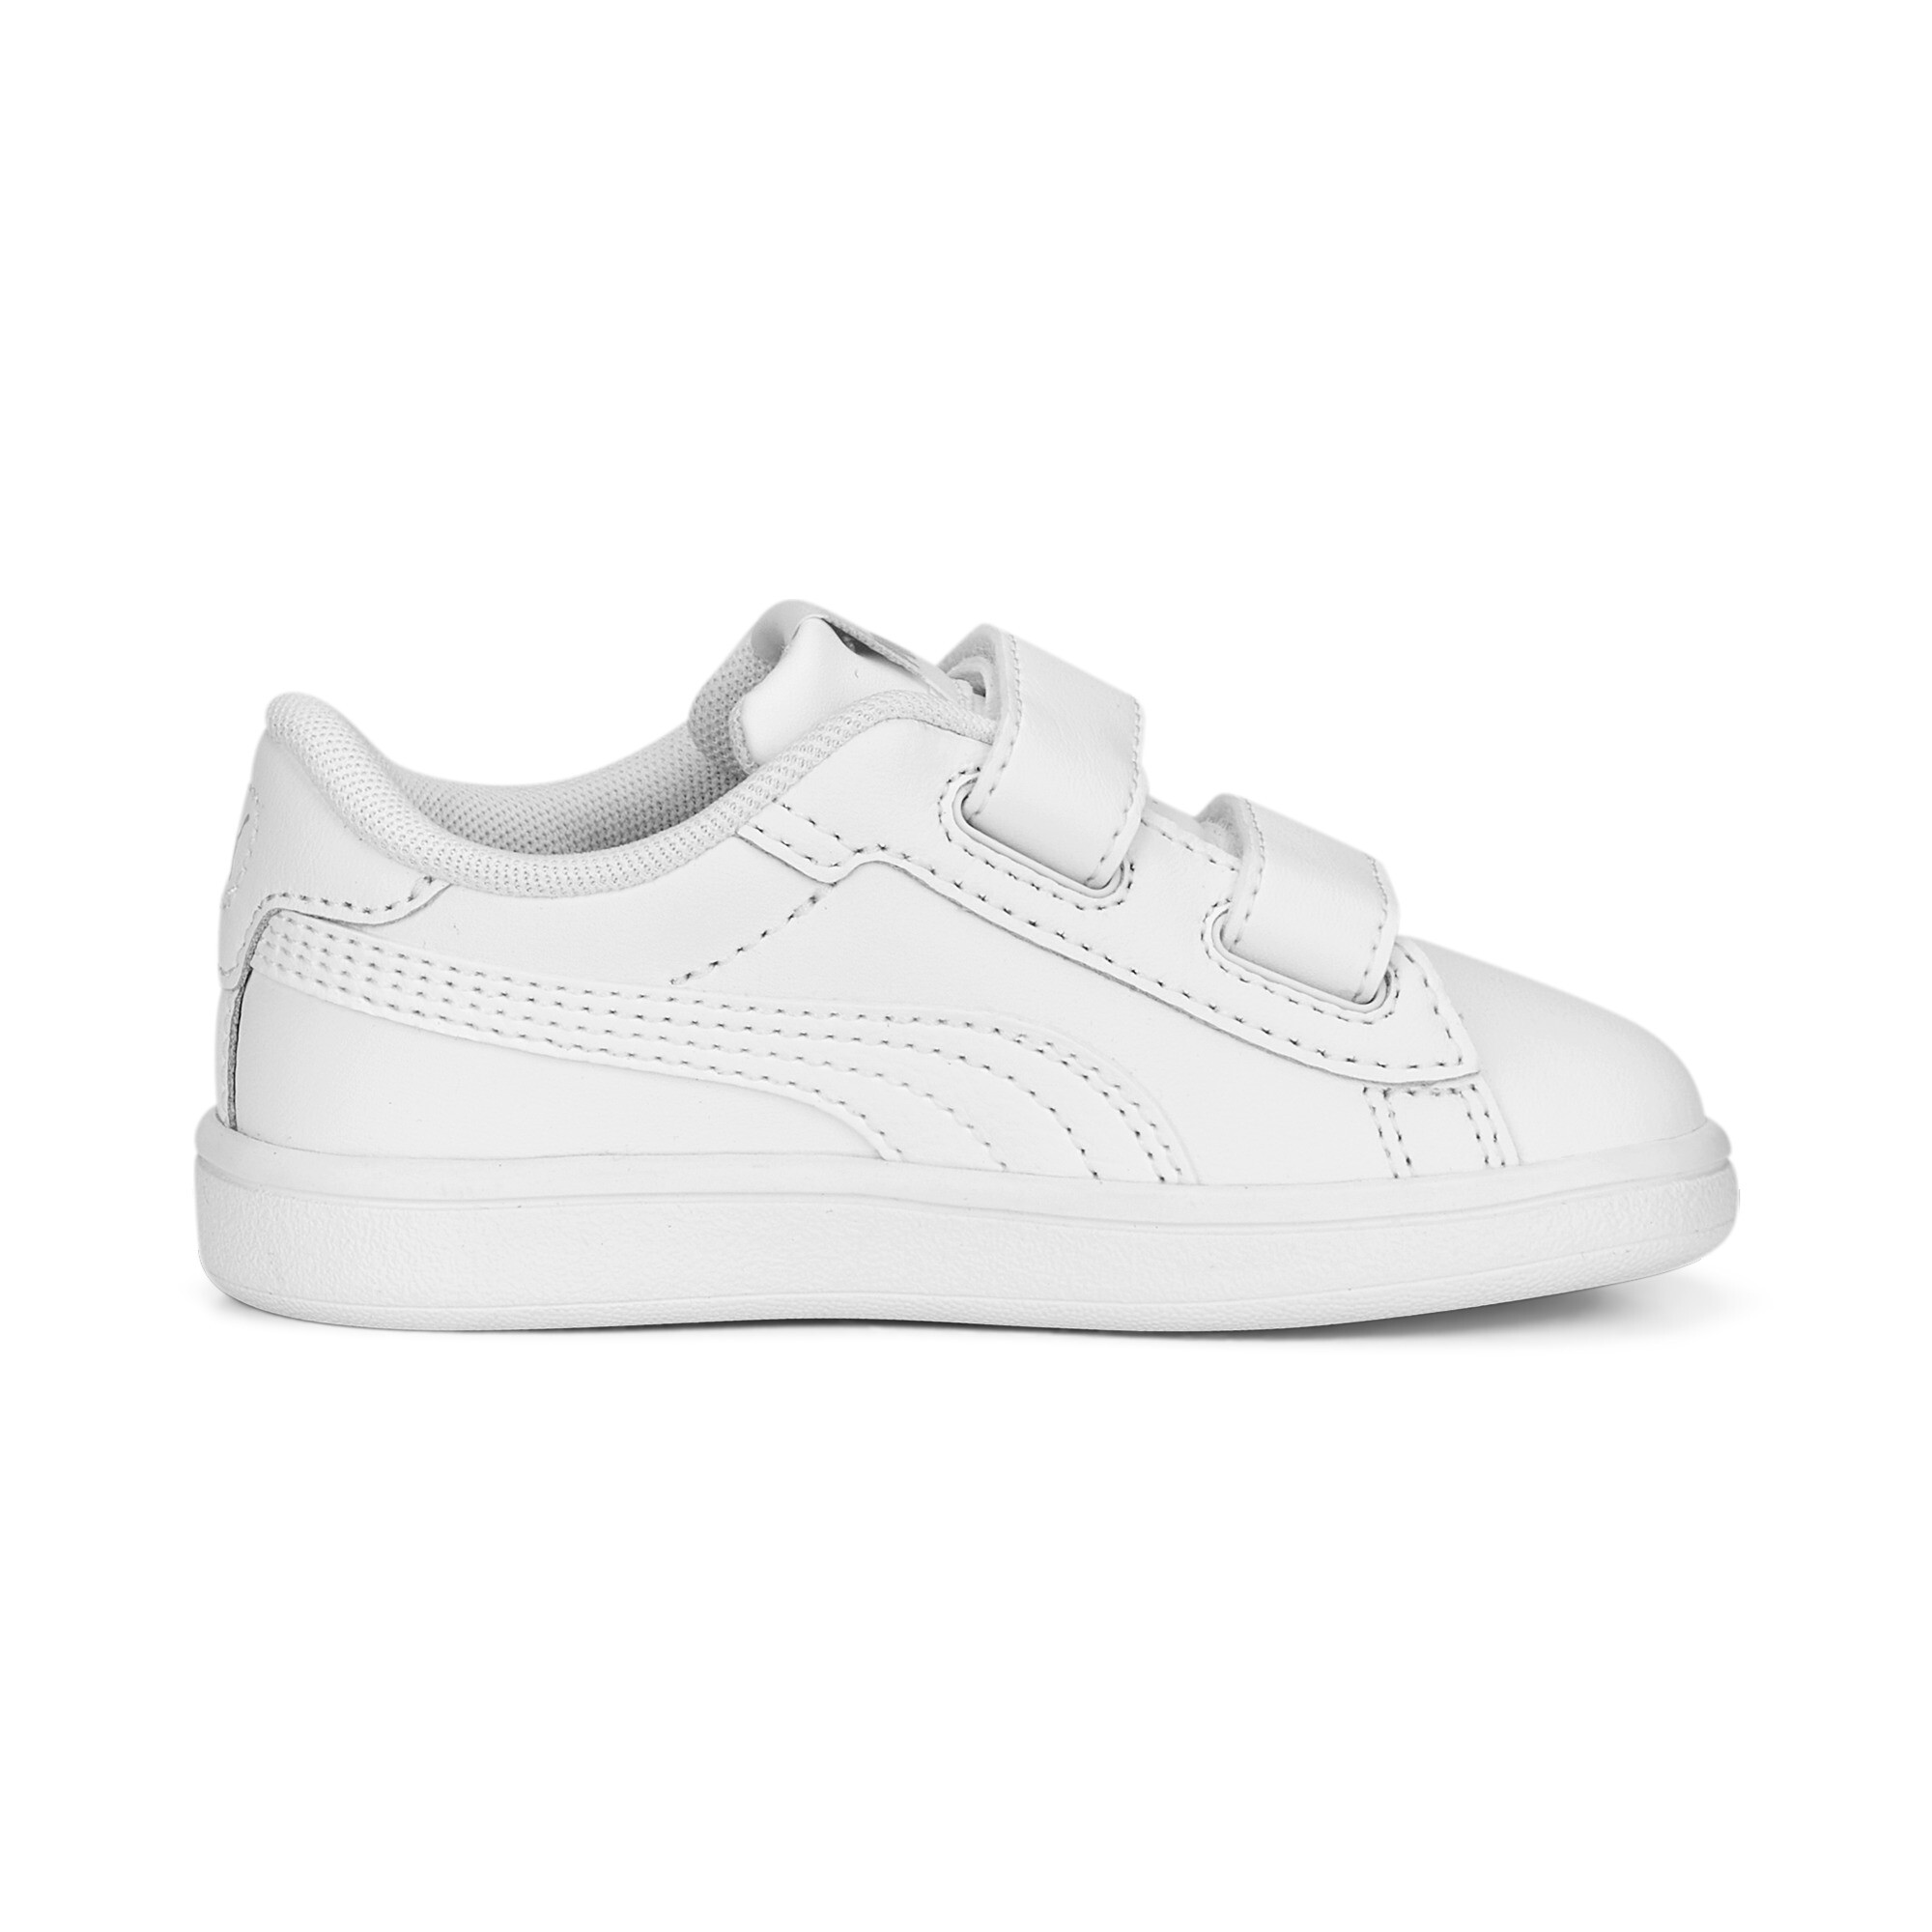 Kids' PUMA Smash 3.0 Leather V Sneakers Baby In White, Size EU 24